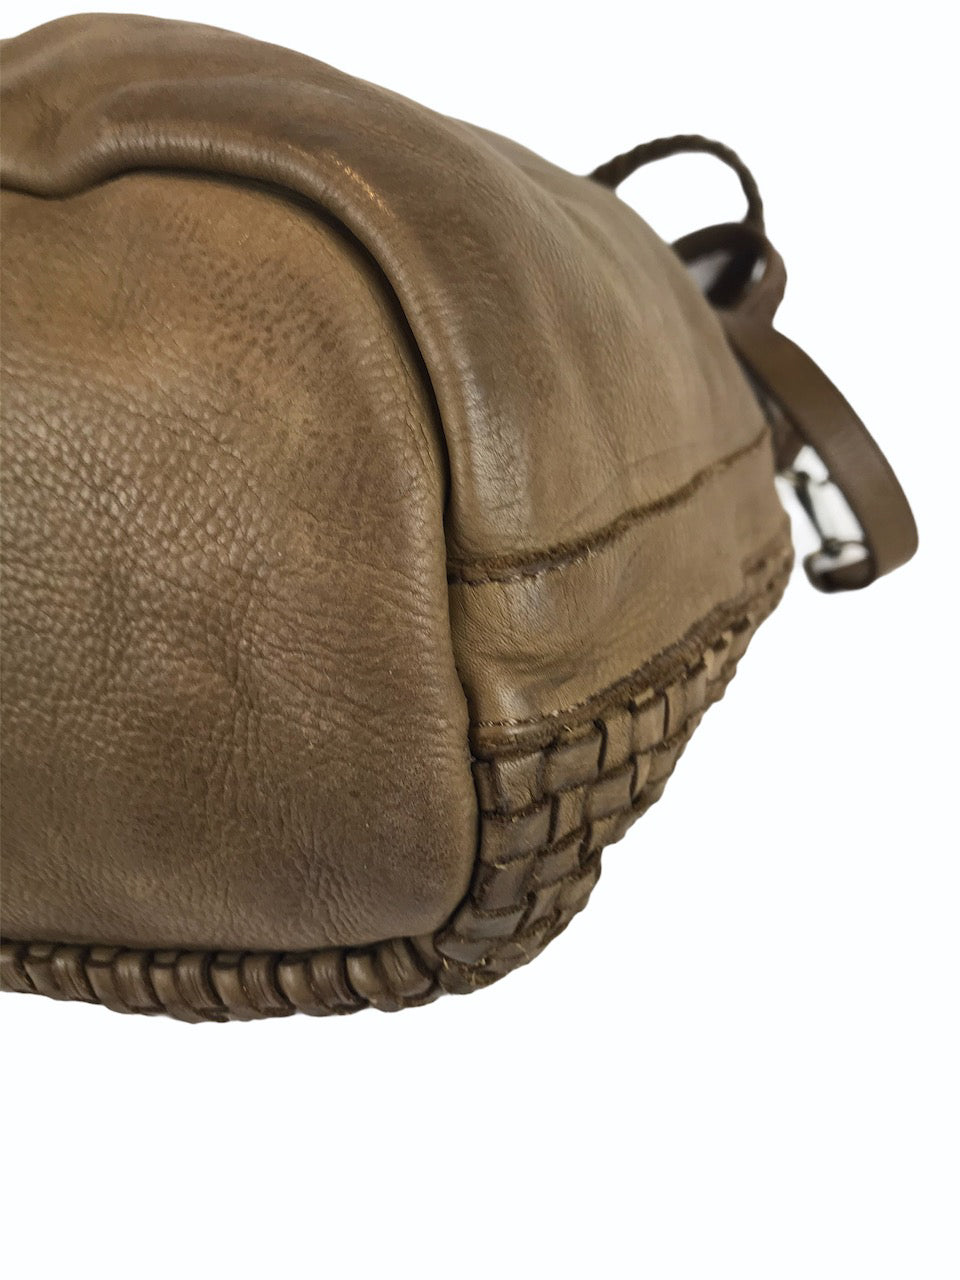 Massimo Dutti Brown Woven Leather Bucket Bag - As Seen On Instagram 09/09/2020 - Siopaella Designer Exchange